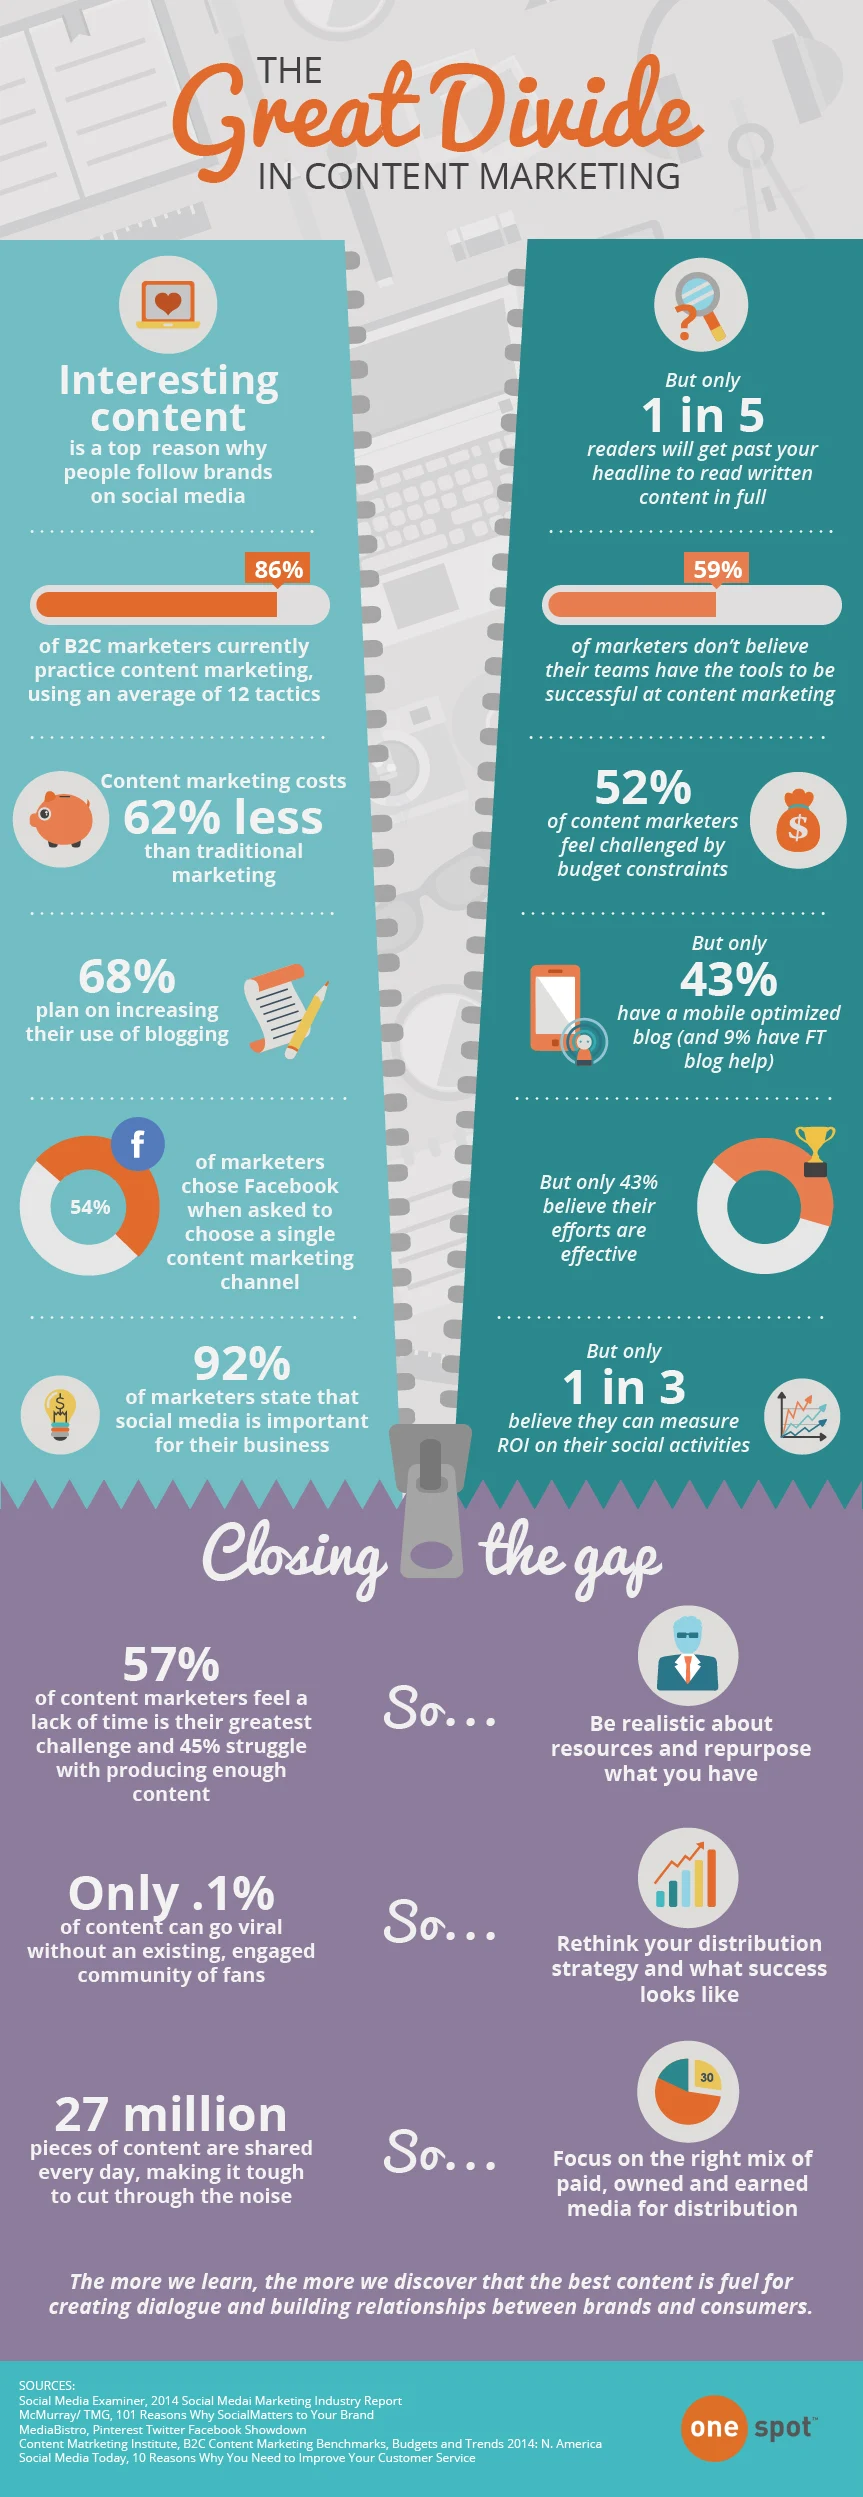 The Great Divide in #ContentMarketing - #infographic